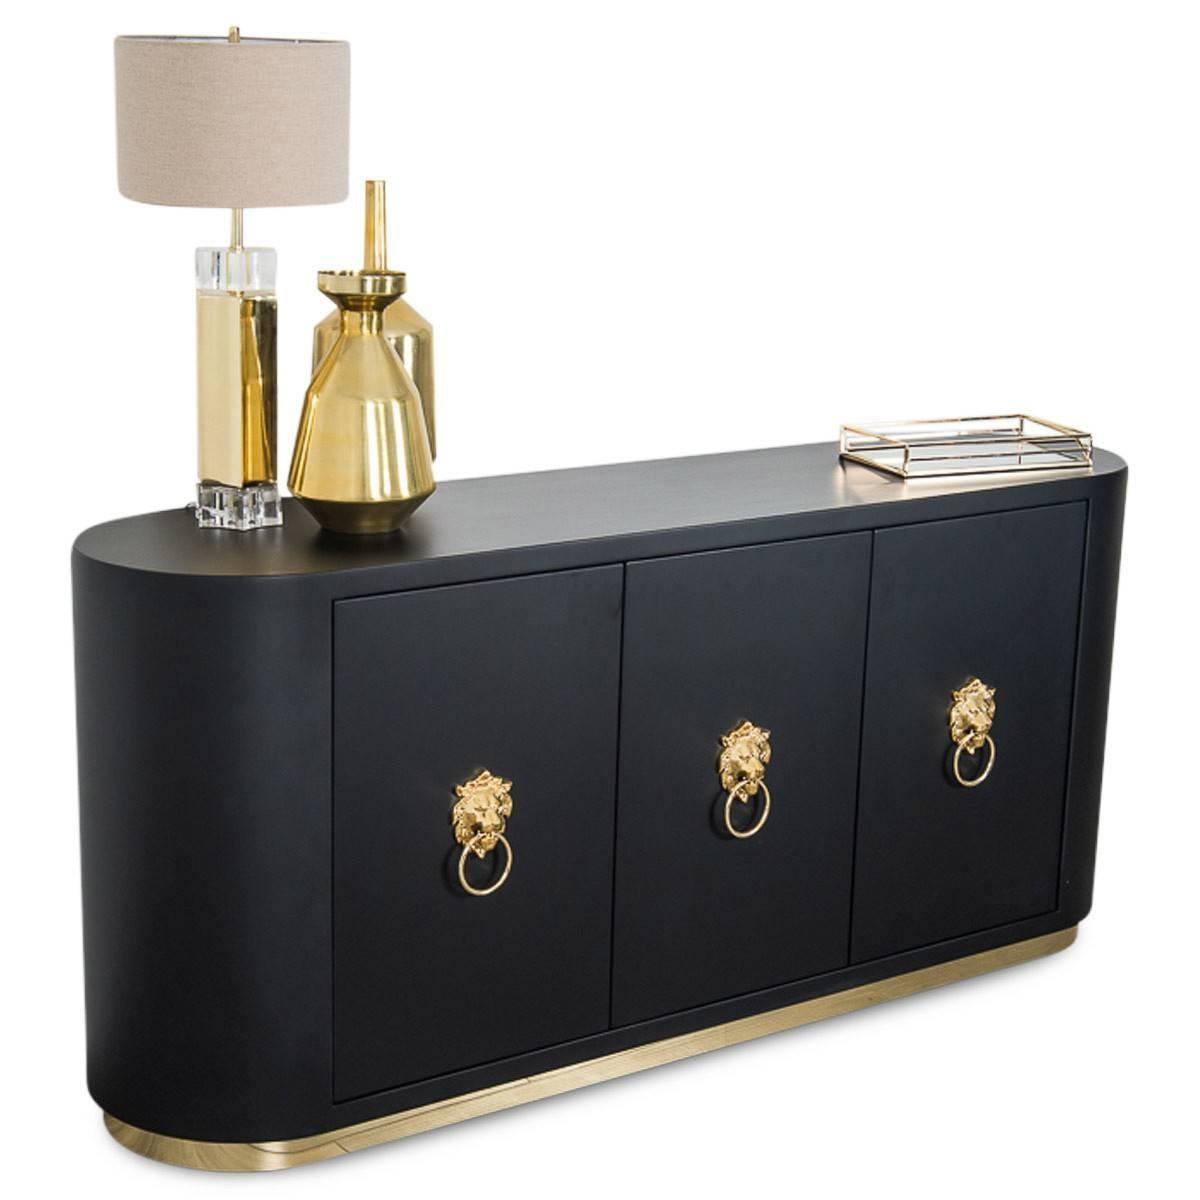 This stunning storage piece is a work of art. The new Art Deco inspired credenza is rounded at the ends. It has three doors adorned with brass, Lion Head knockers. The credenza is a matte black with a 2 inch toe kick made of brass. It also has two